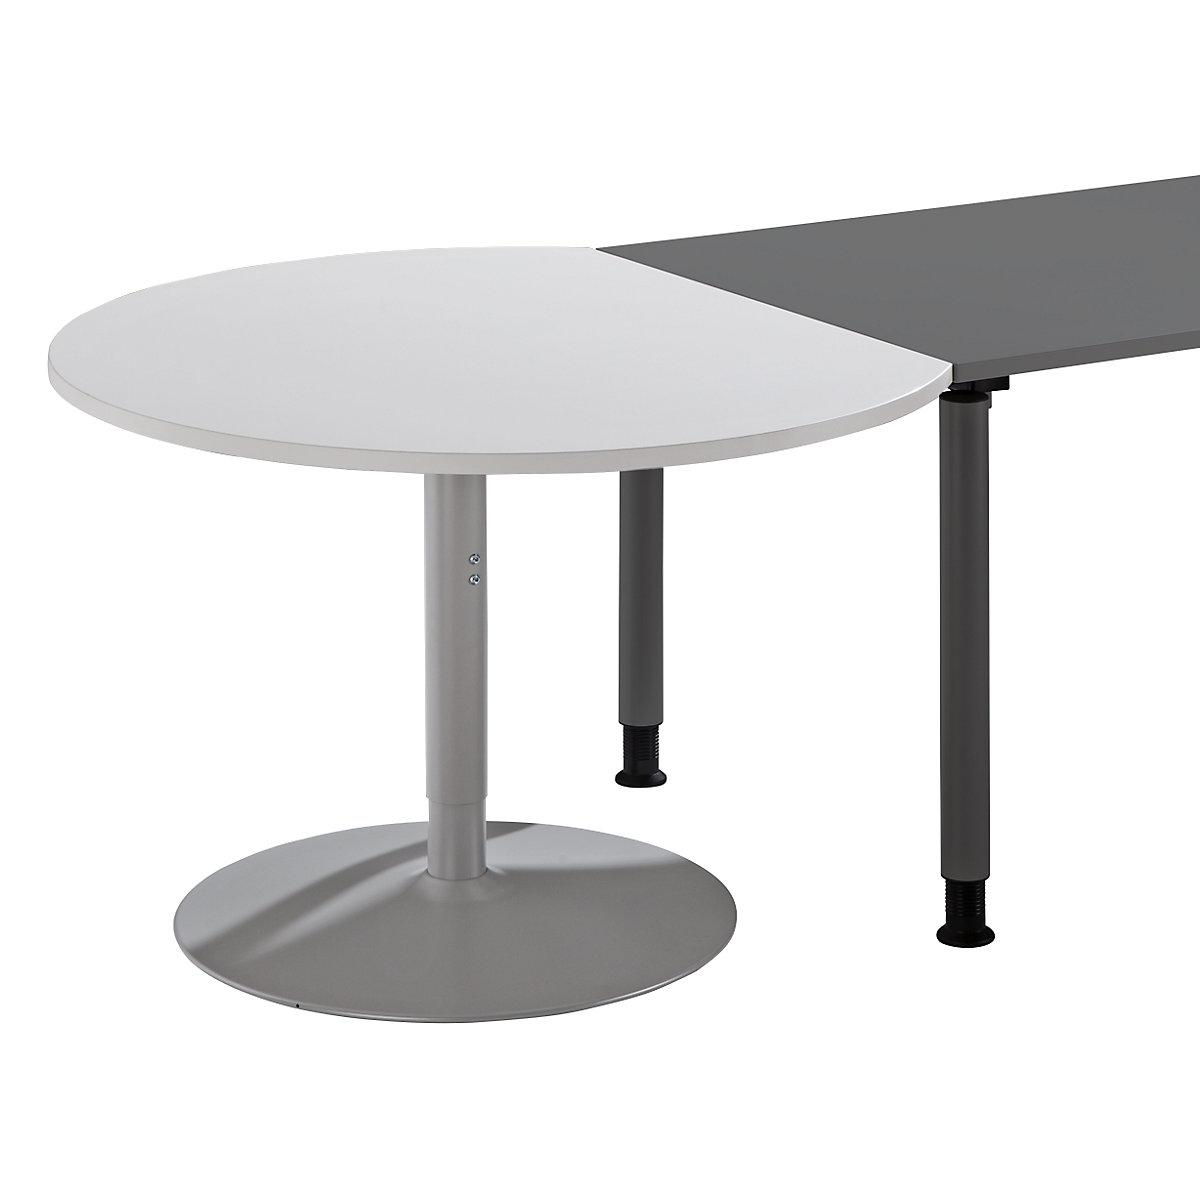 Add-on table THEA